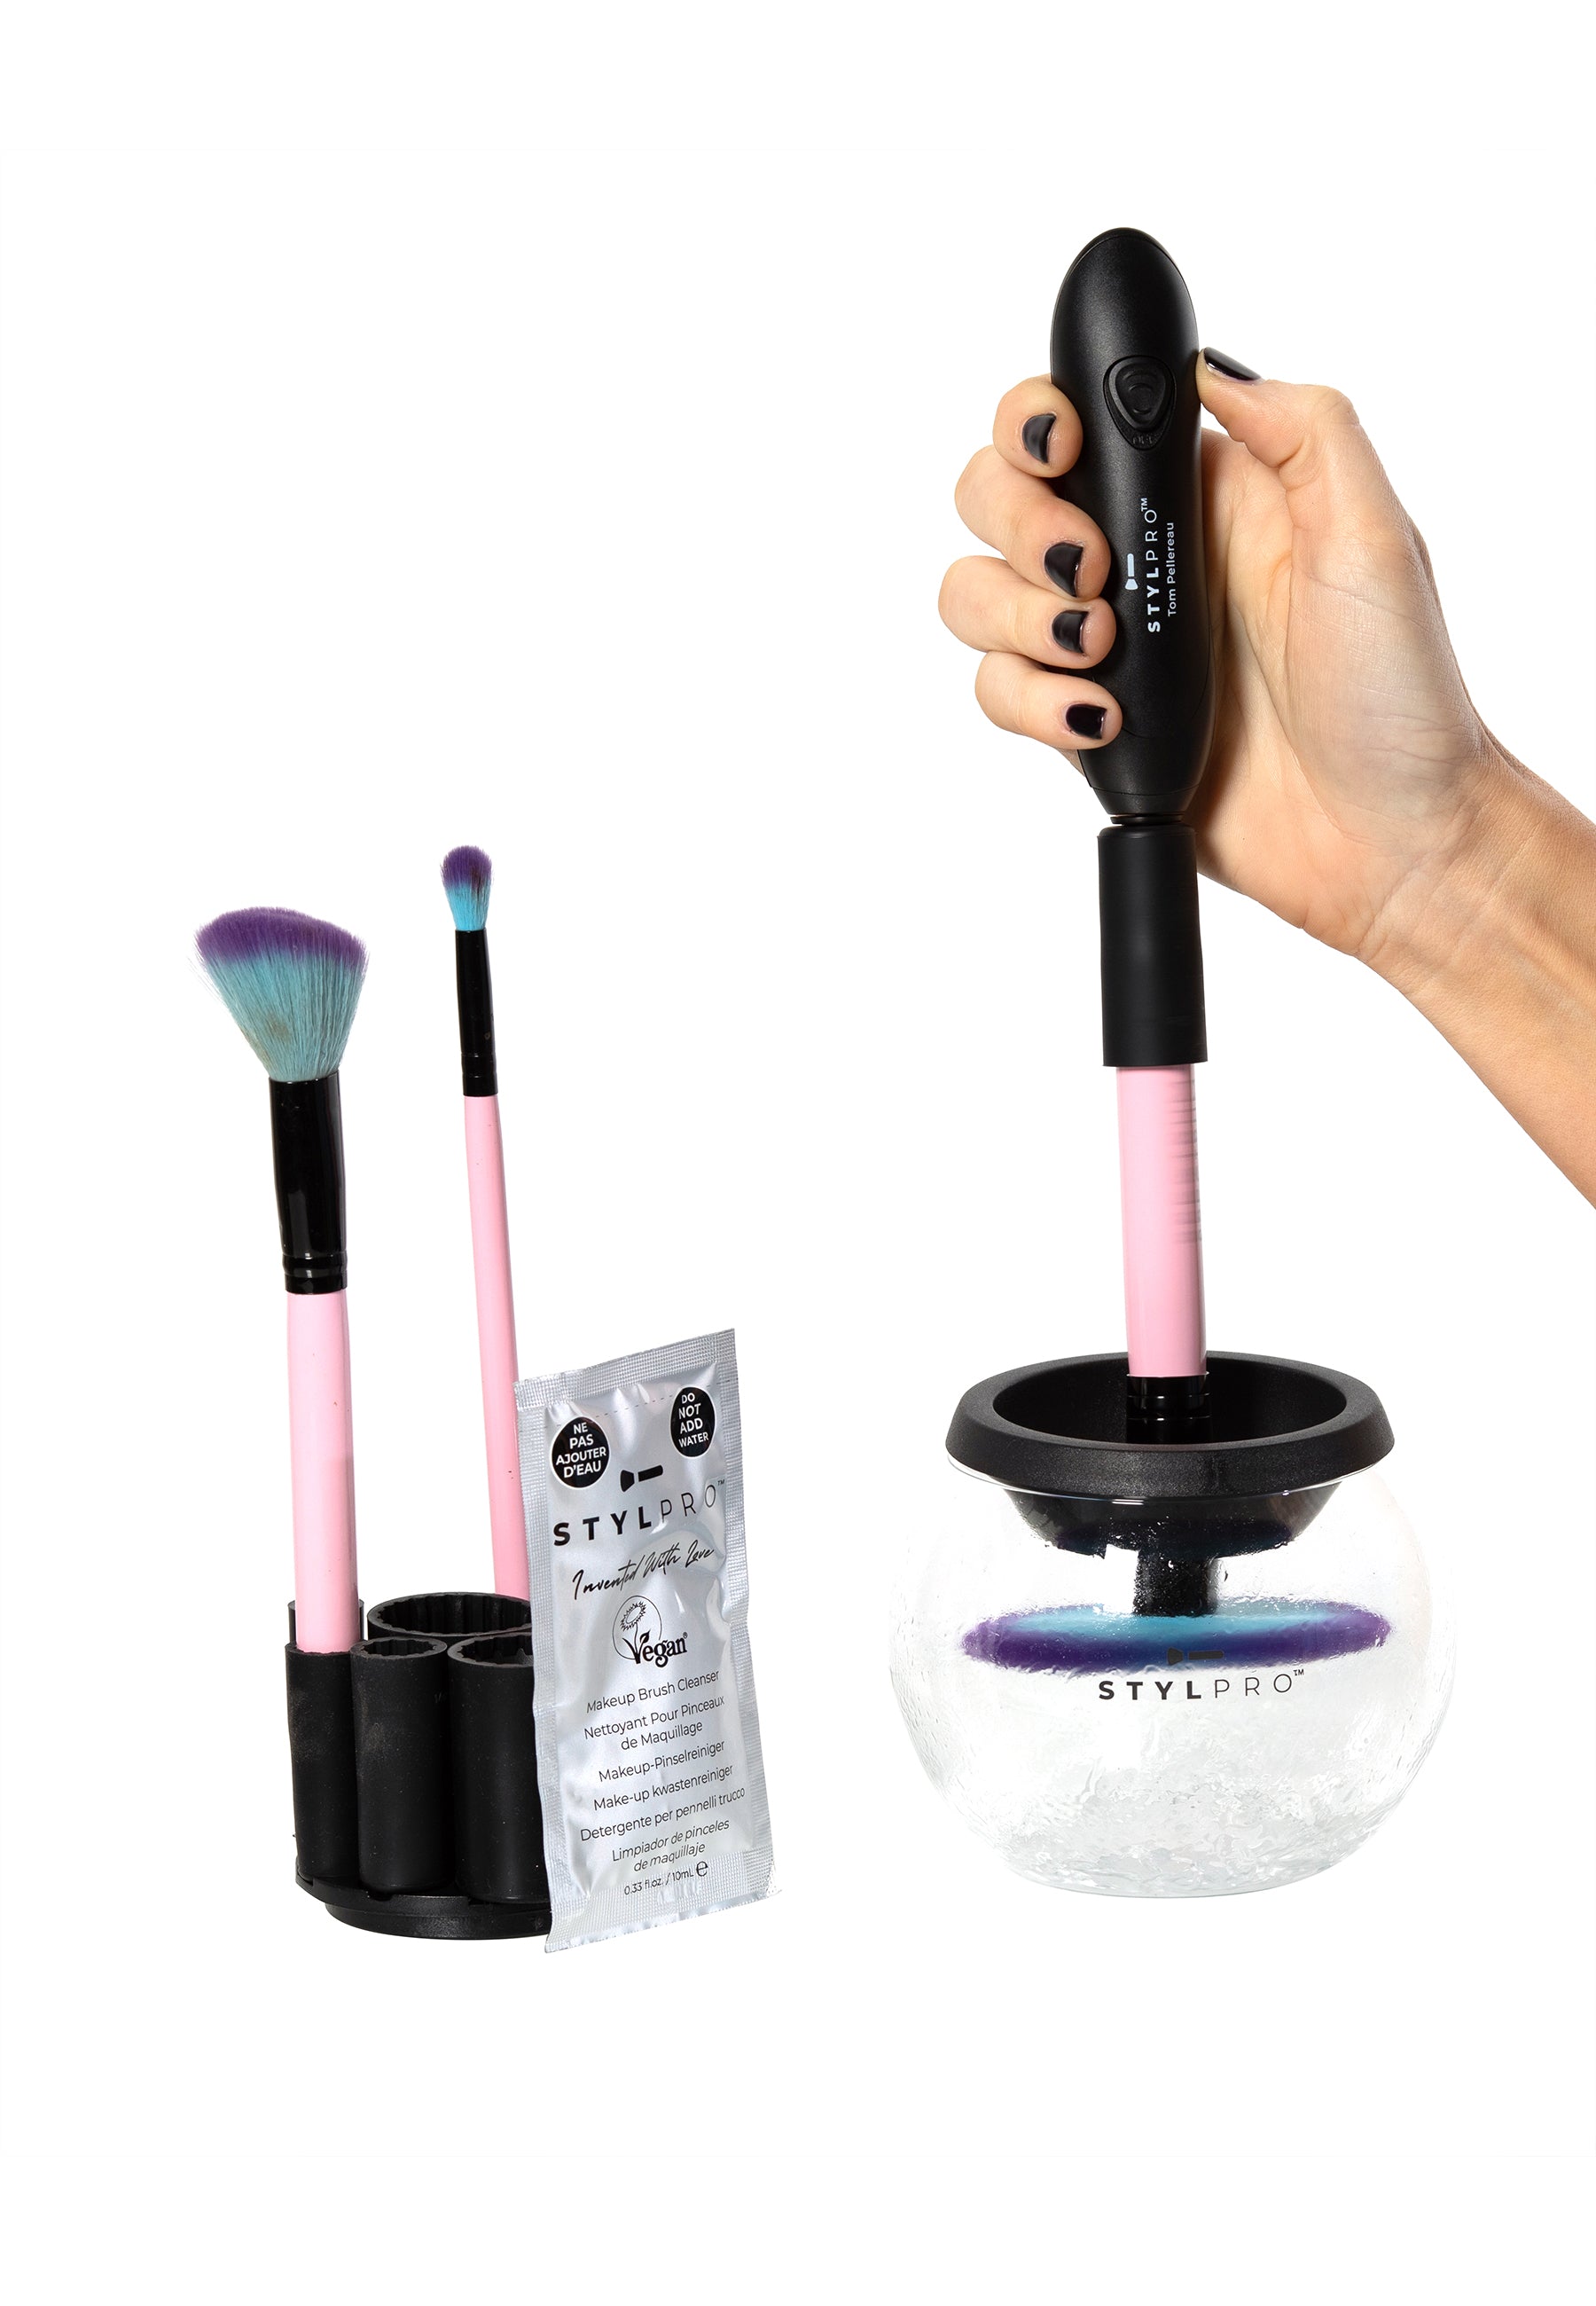 Makeup Brush Cleaner, Electric Makeup Brush Cleaner Machine for Makeup  Brush, Makeup Sponge, Double Brush, Best Mother's Day Gift Birthday Gift  for